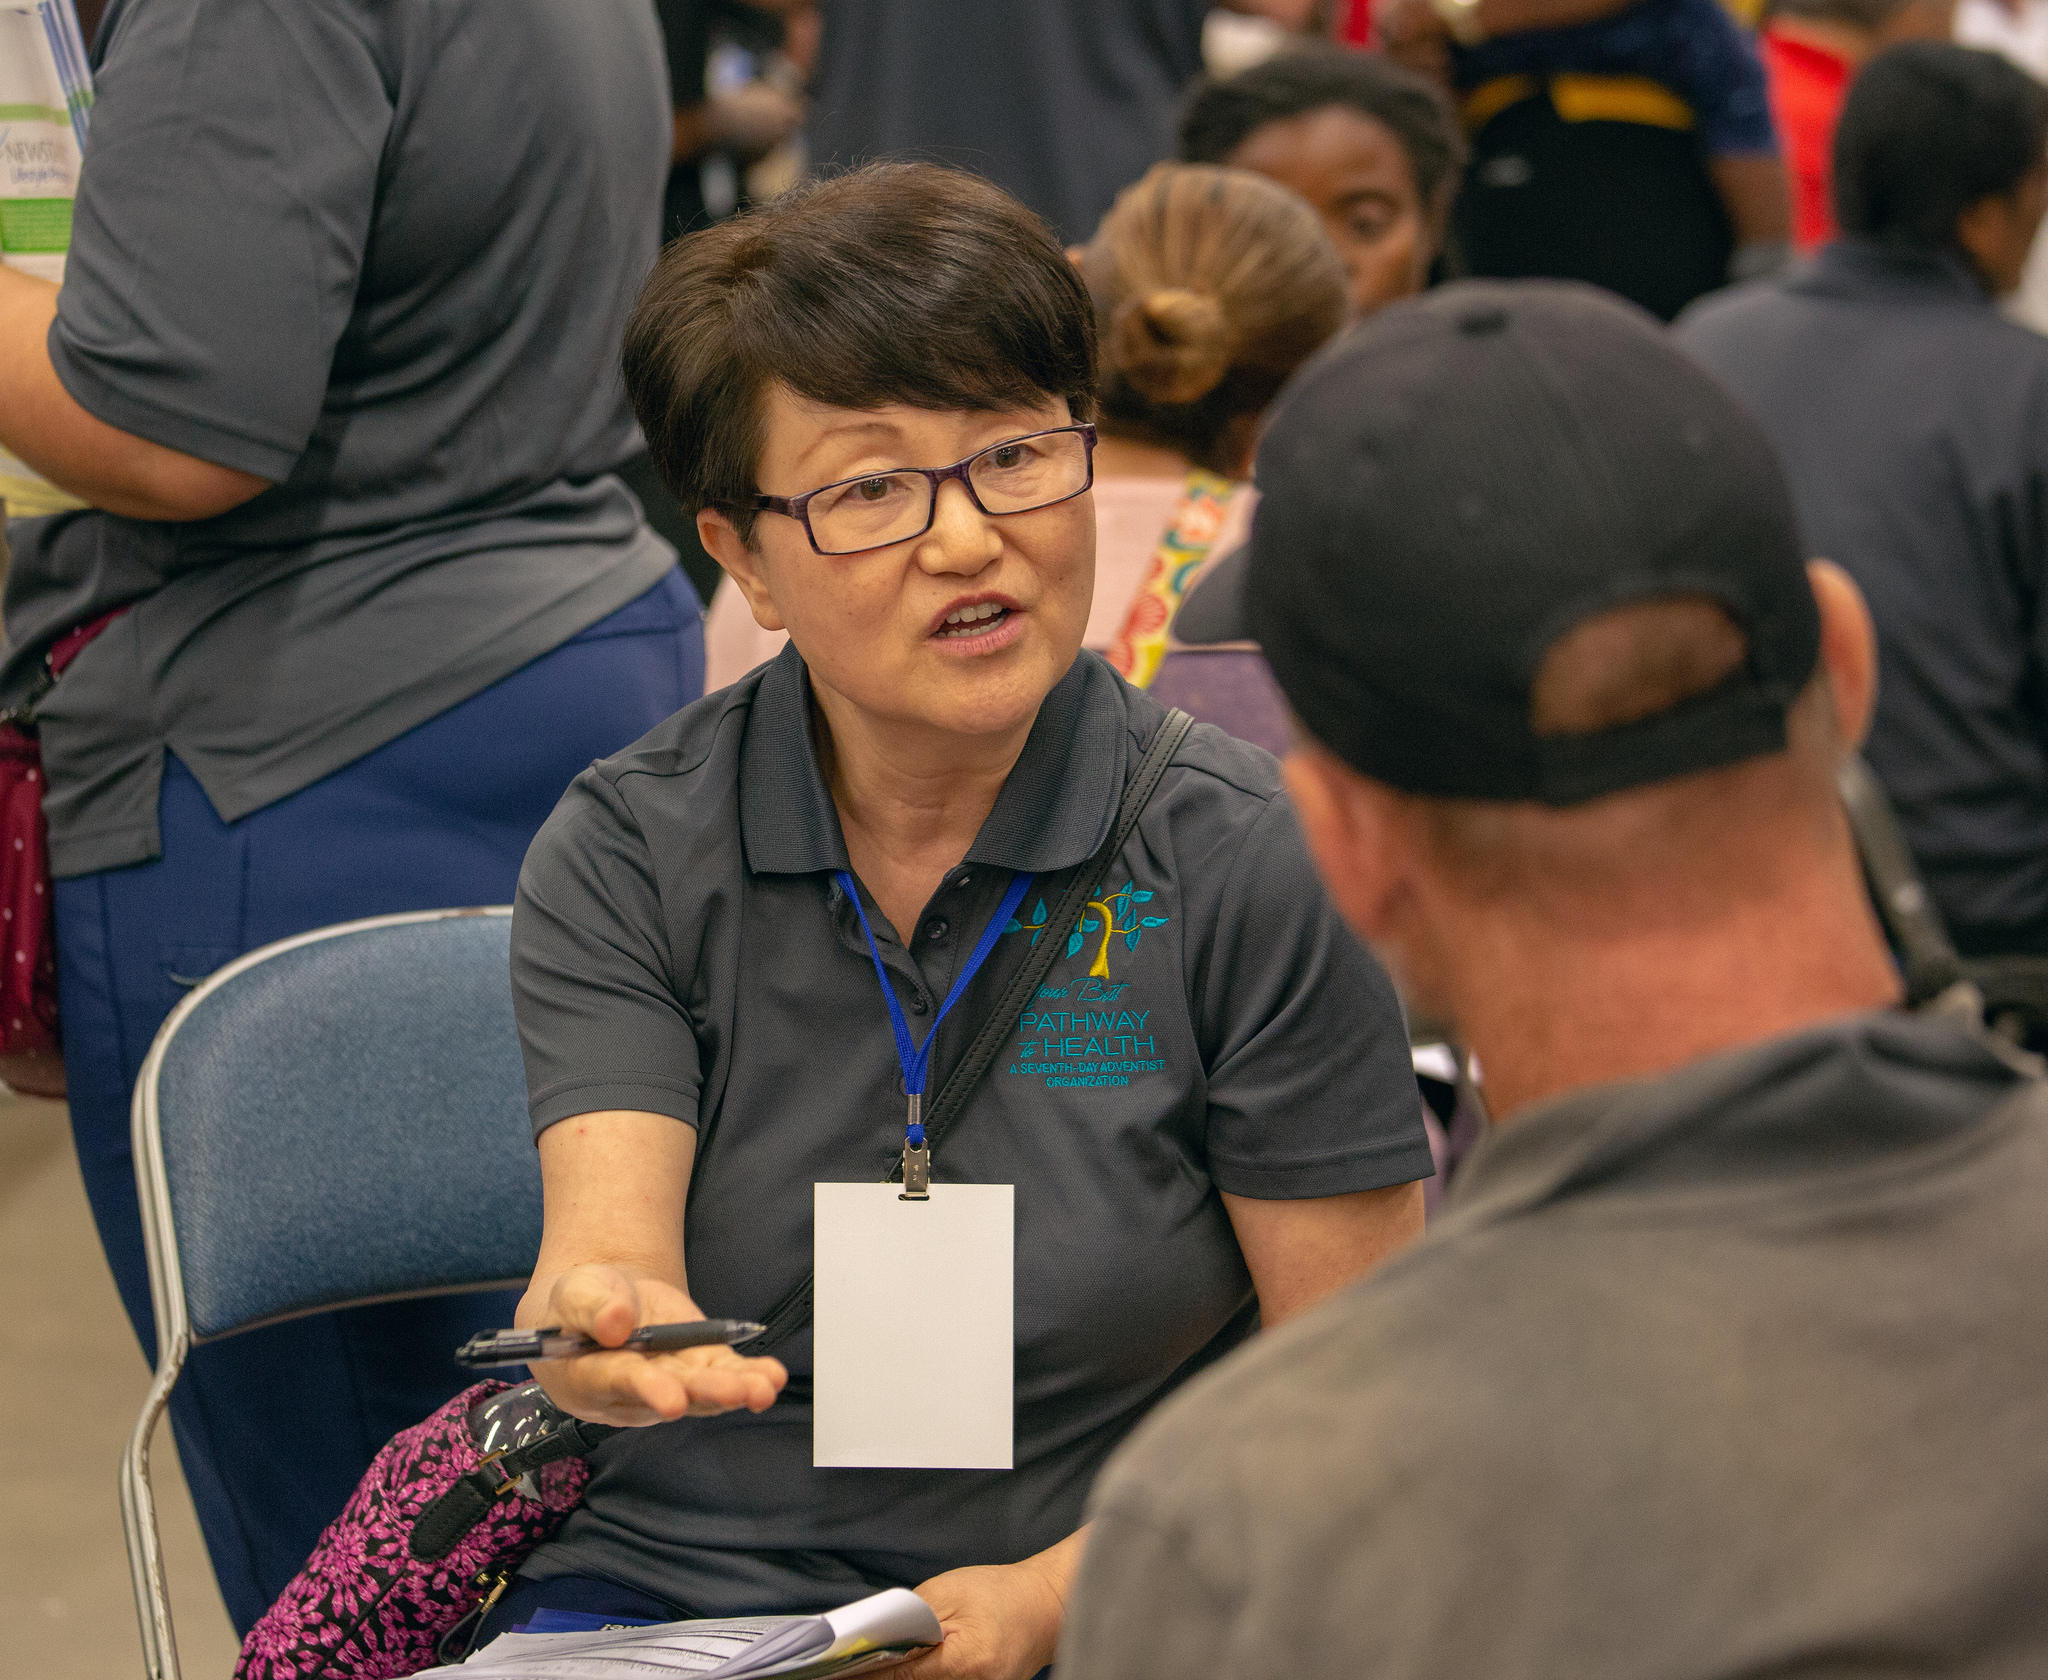 A volunteer shares information on a healthful lifestyle with a patient at the Sept. 19-21, 2018, mega clinic in Forth Worth, Texas. Photo by Pieter Damsteegt